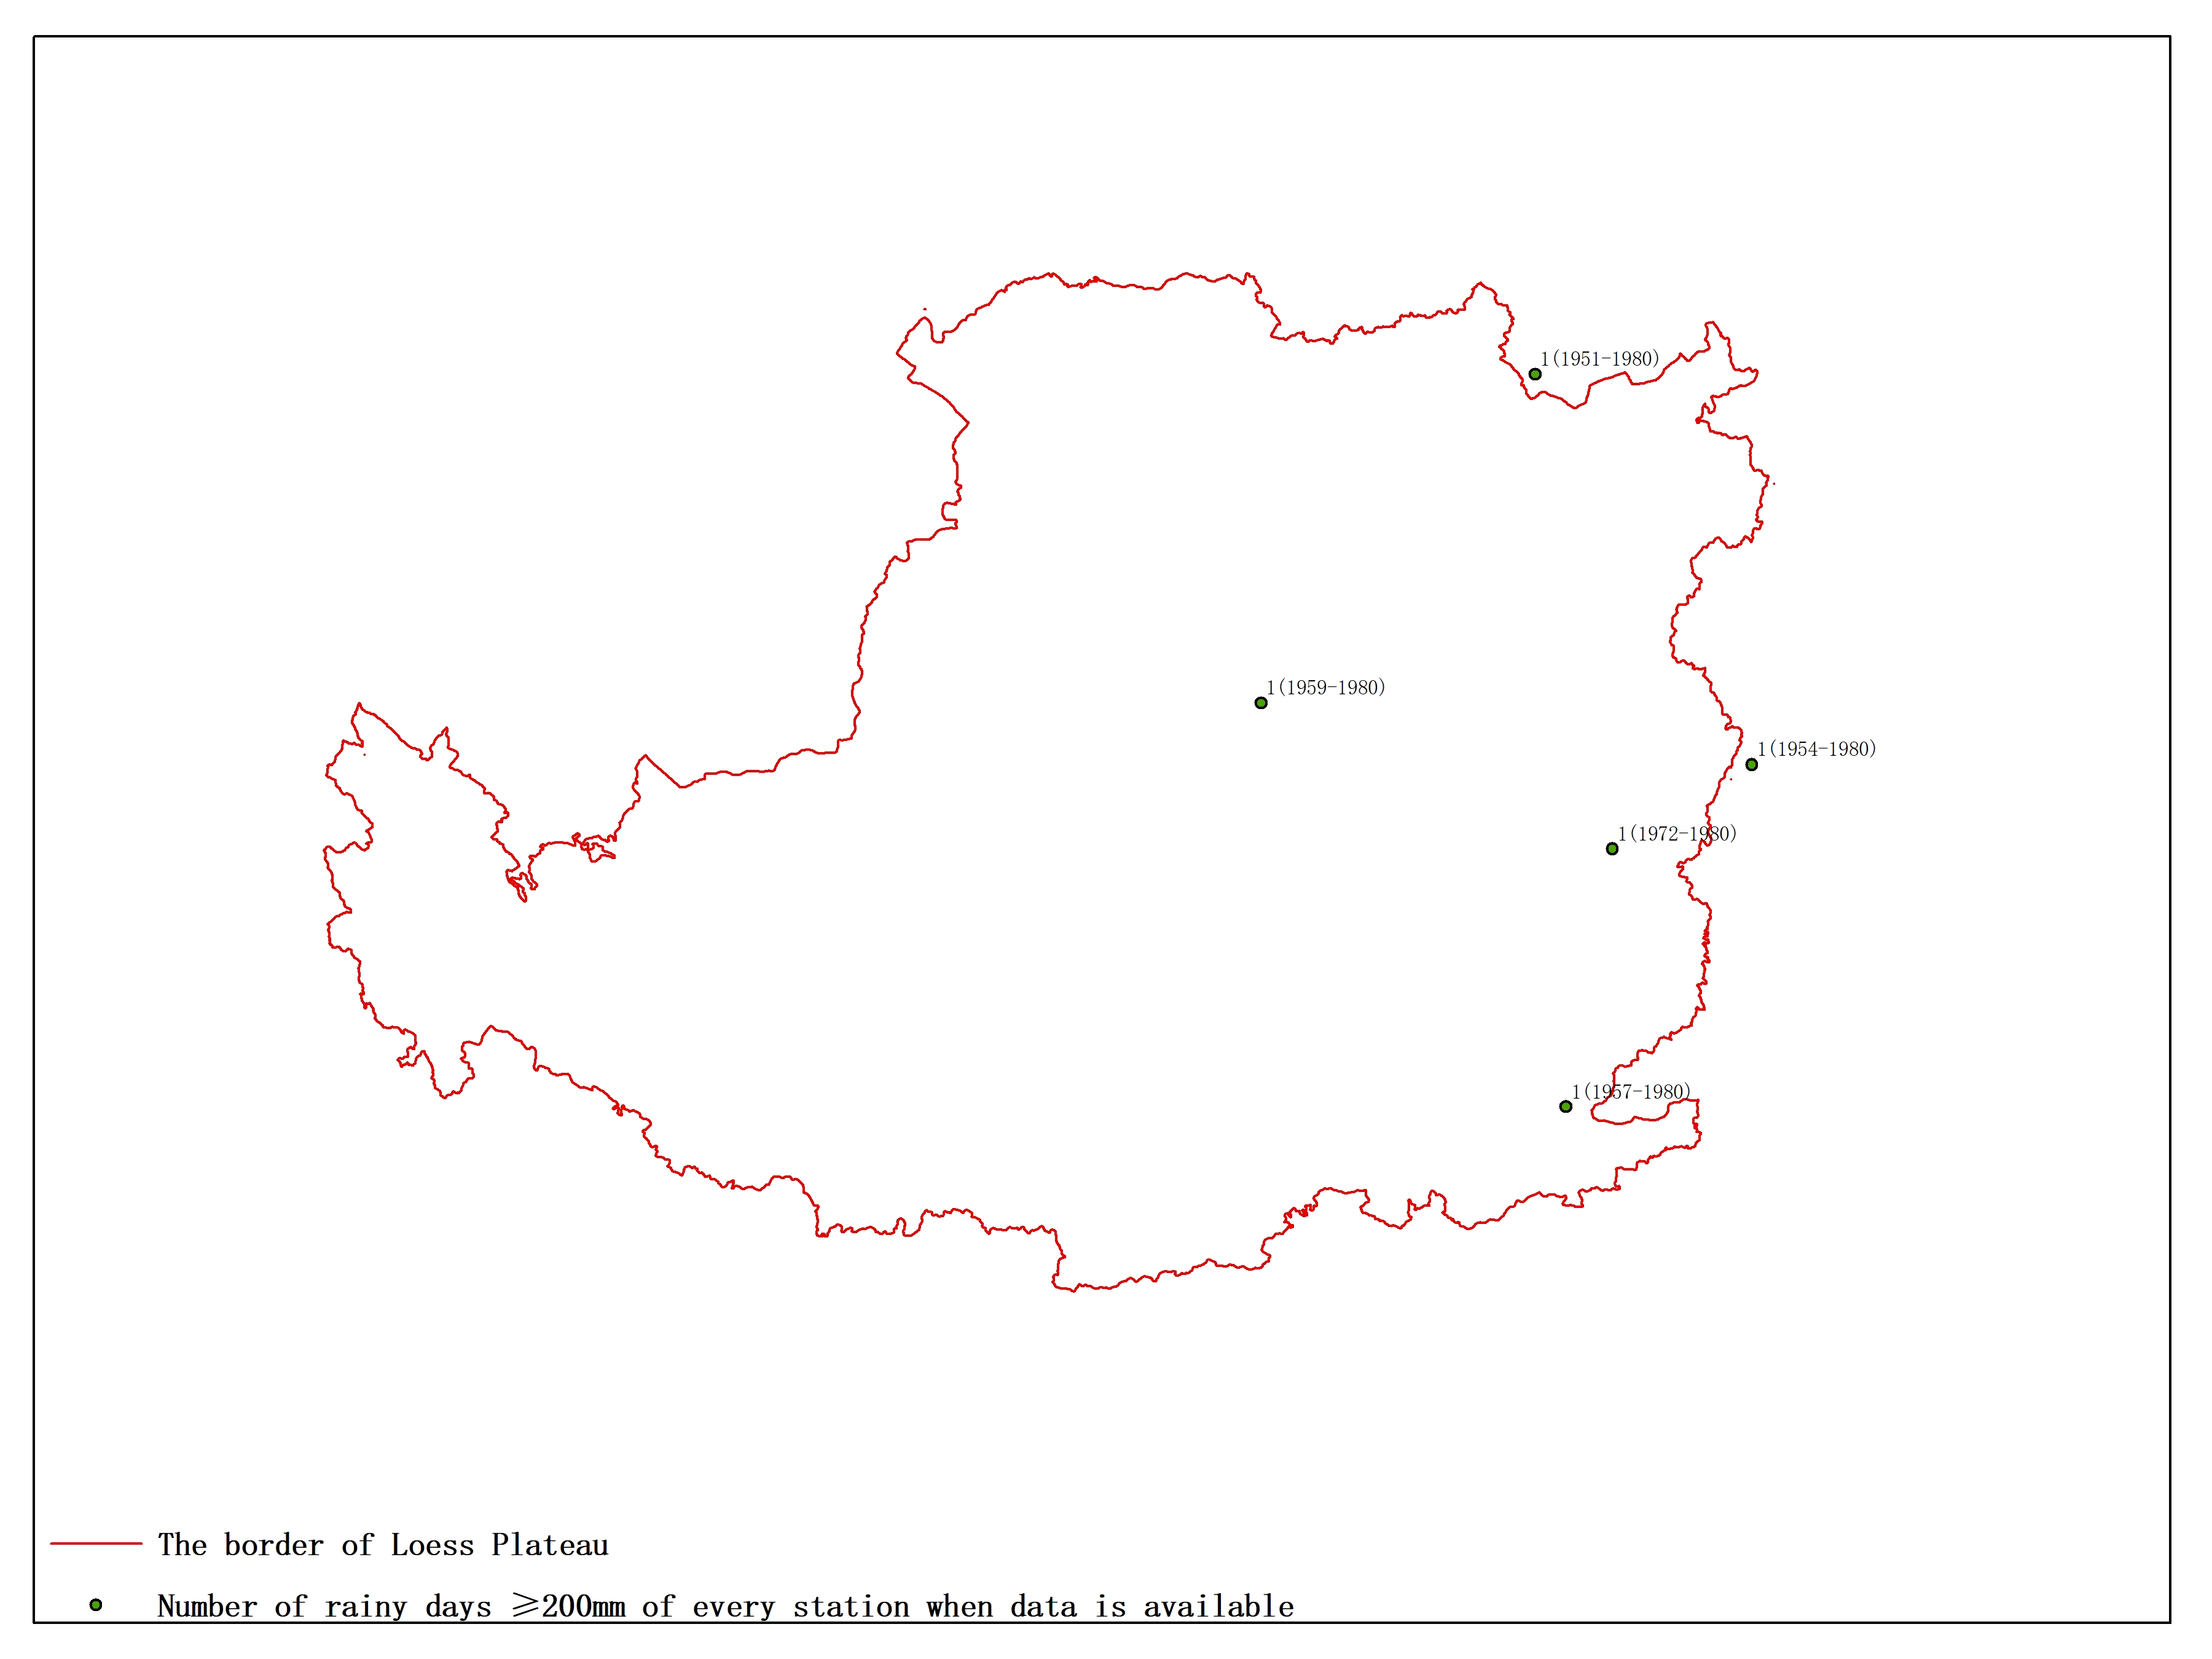 Agricultural climate resource atlas of Loess Plateau-Number of rainy days ≥200mm of every station when data is available